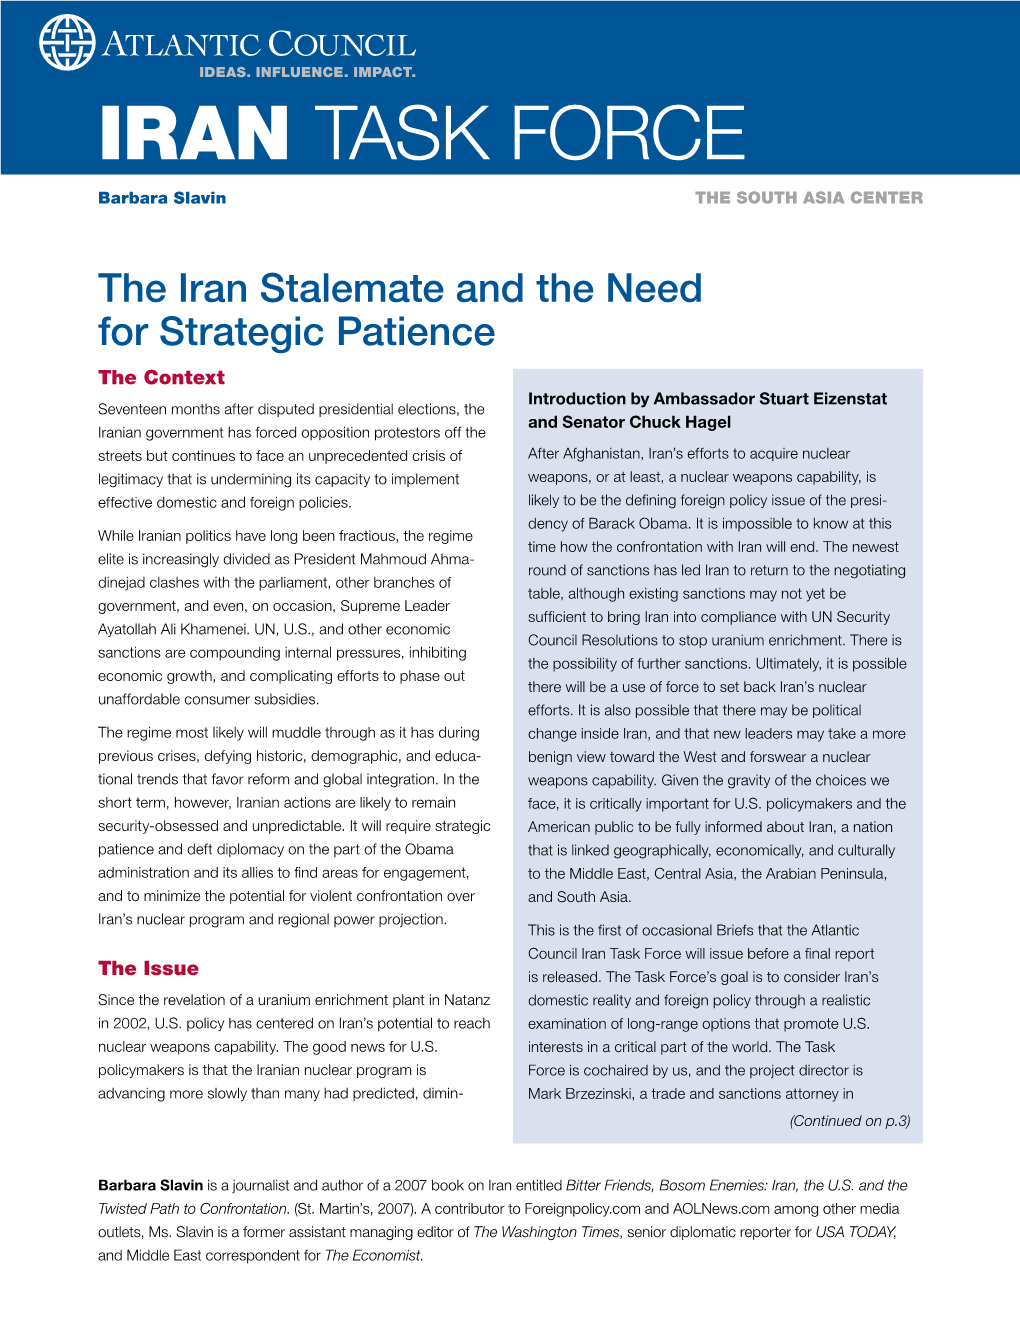 The Iran Stalemate and the Need for Strategic Patience